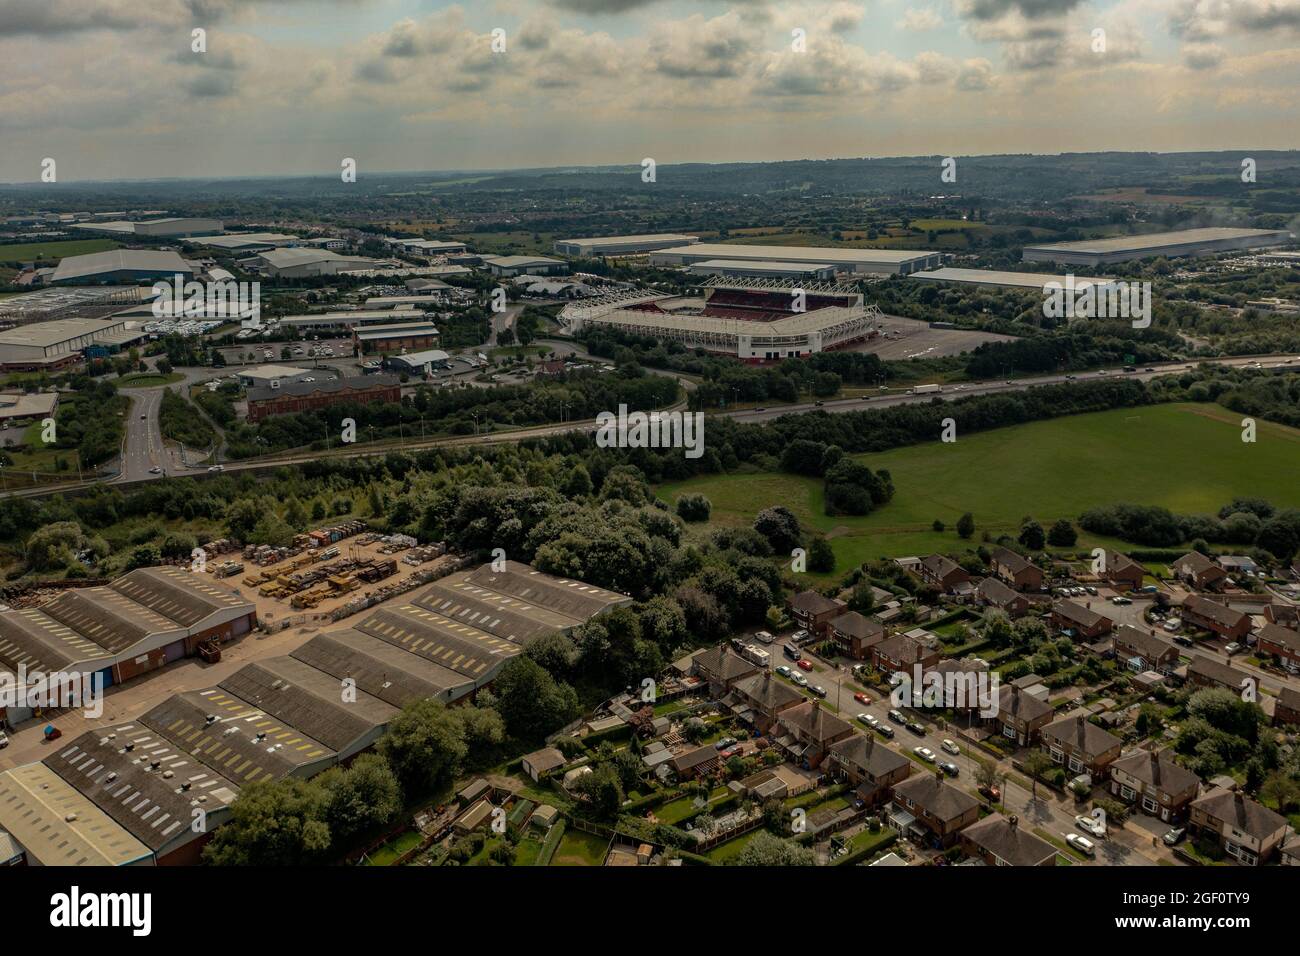 Birds Eye View of the Bet 365 Stadium Home of Stoke City Football Club Aerial View Long Perspective (immagini più vicine disponibili) Foto Stock